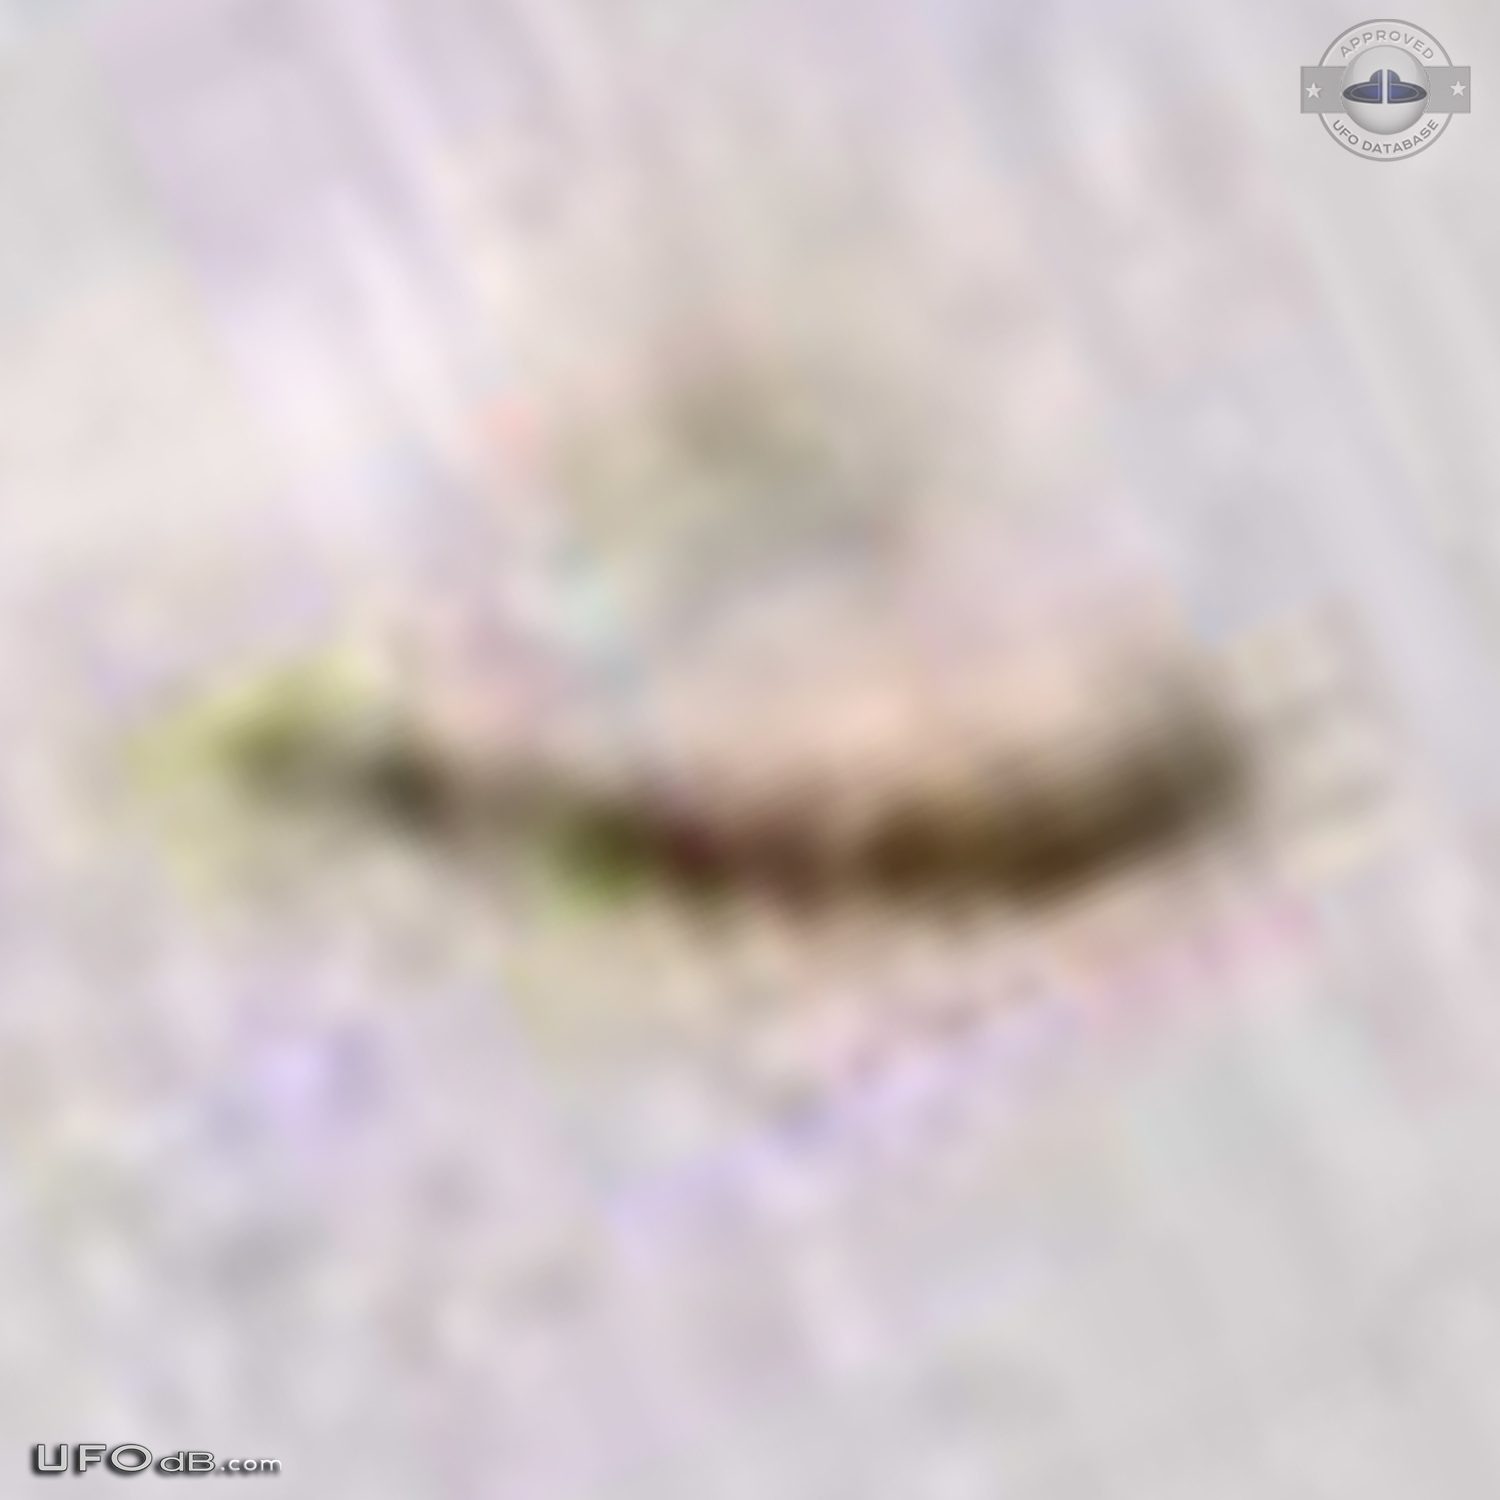 1967 Peru UFO sighting caught on pictures Huaylas Valley Yungay Ancash UFO Picture #440-8